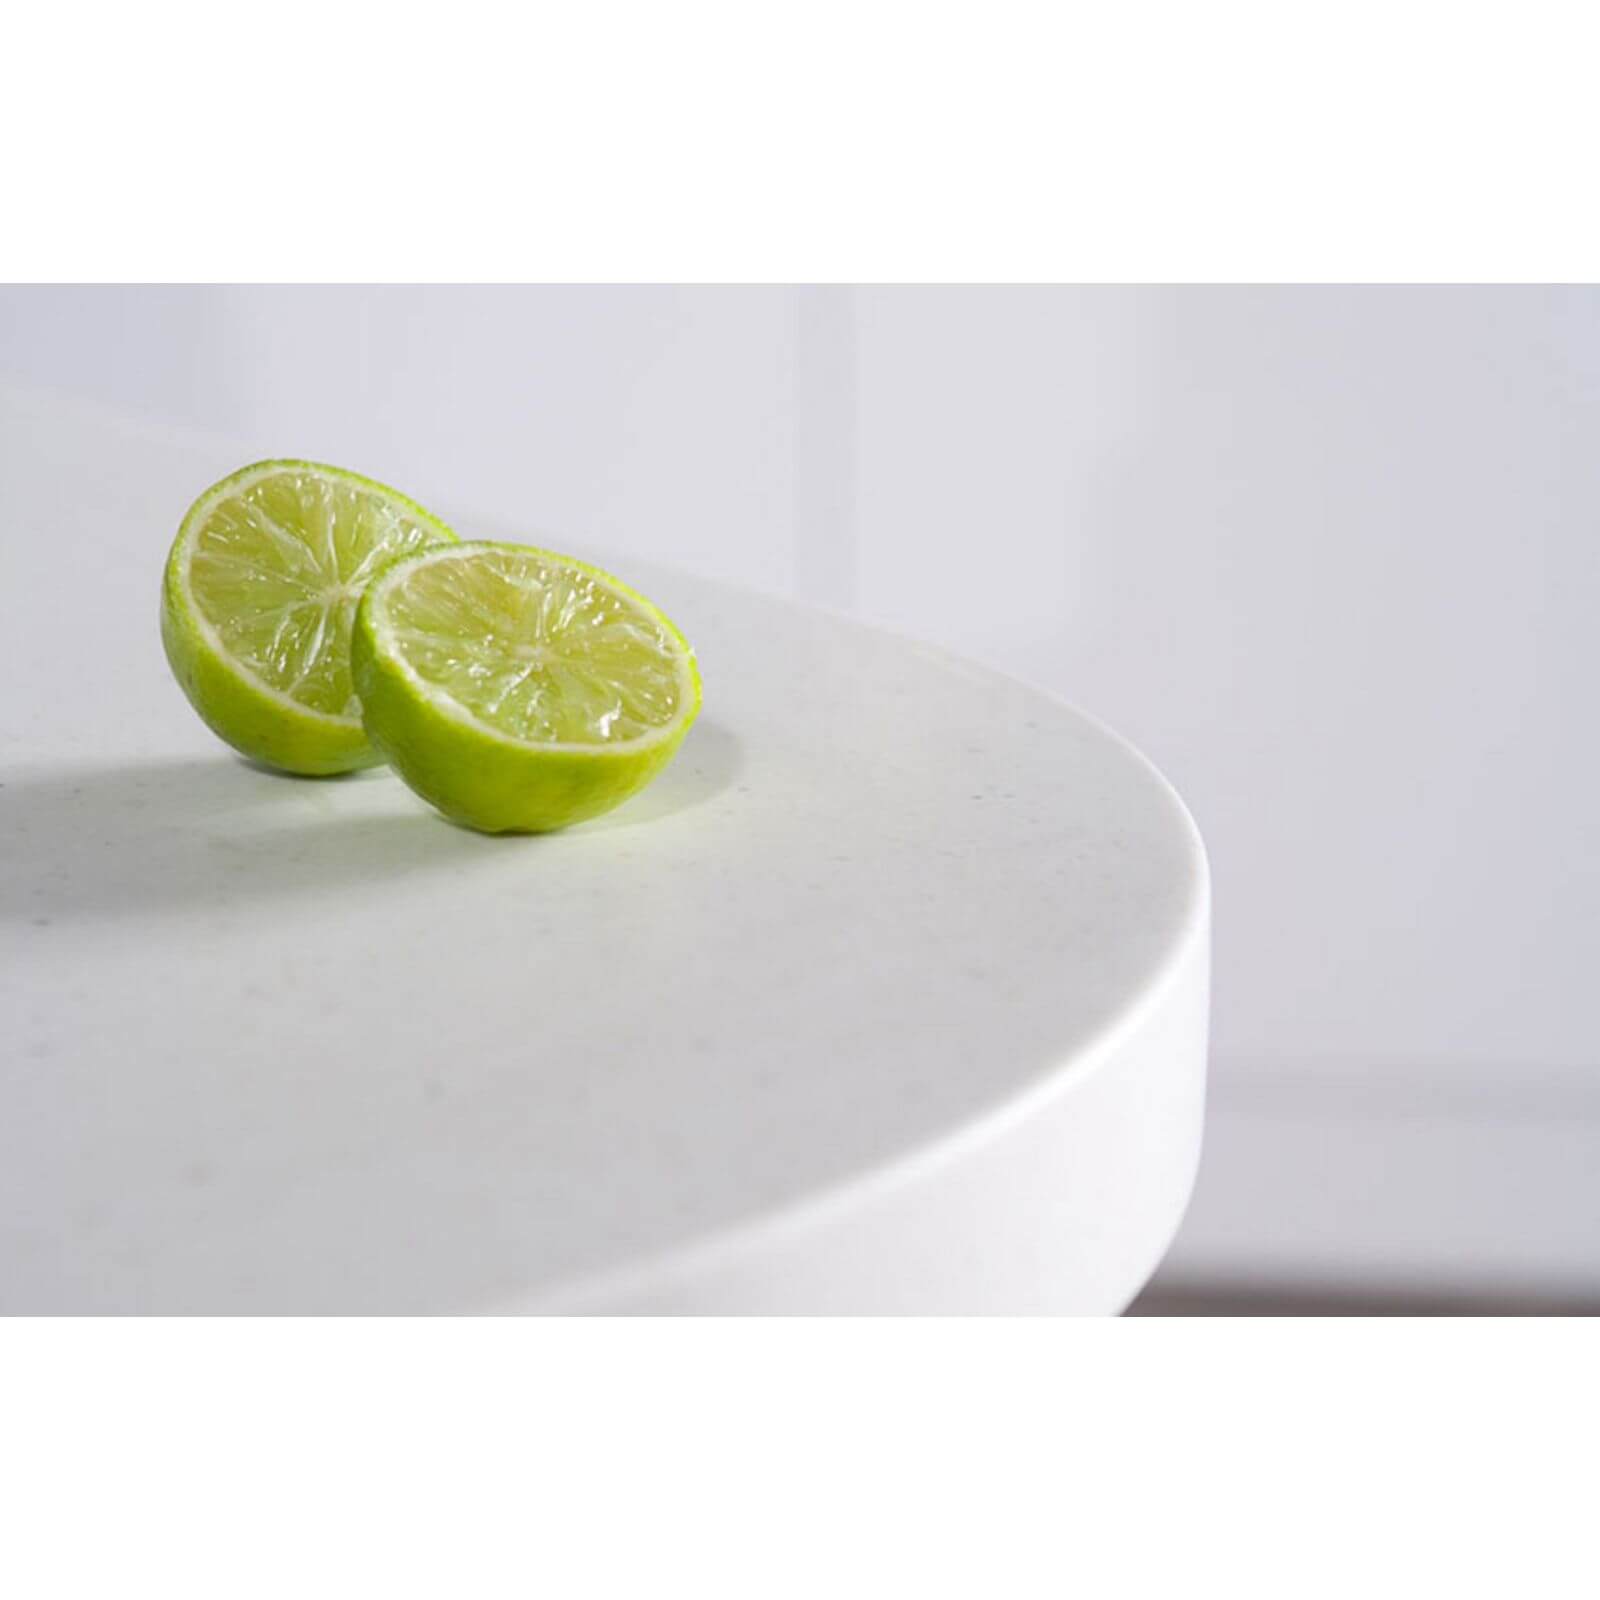 Maia Calcite Kitchen Sink Worktop - Acrylic Super Large Left Hand Bowl - 1800 x 650 x 28mm